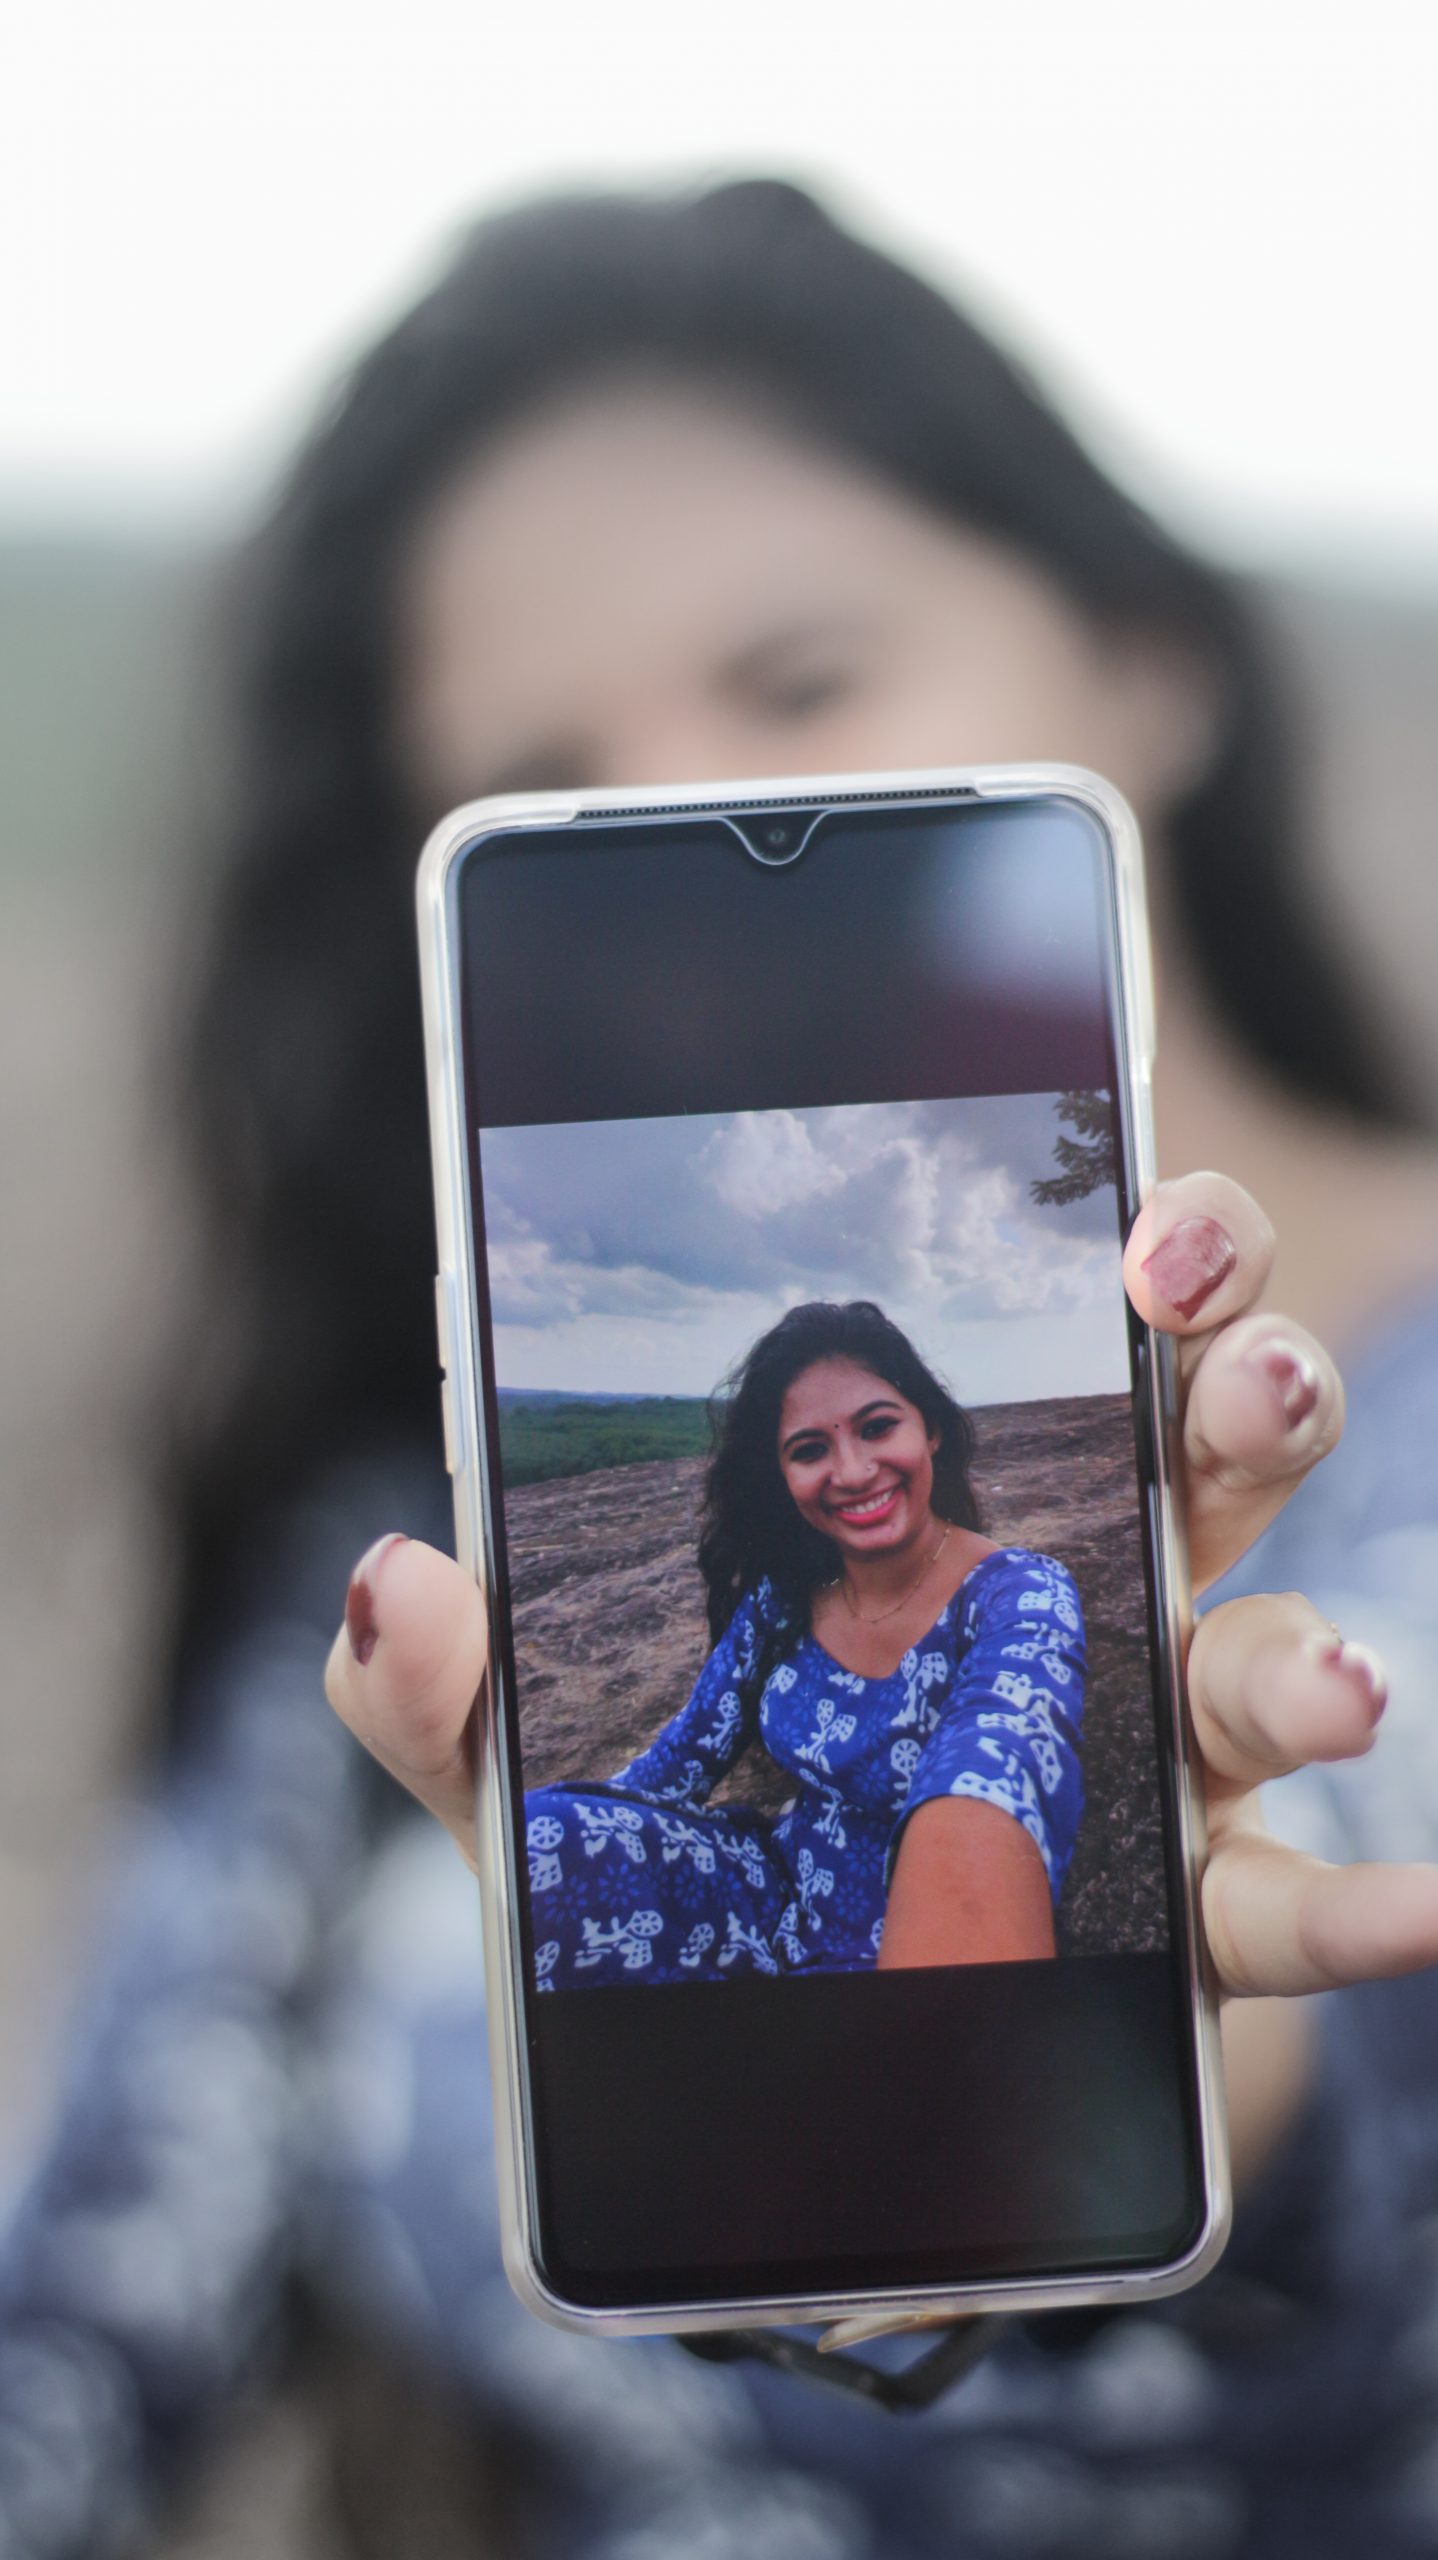 A girl showing her selfie image